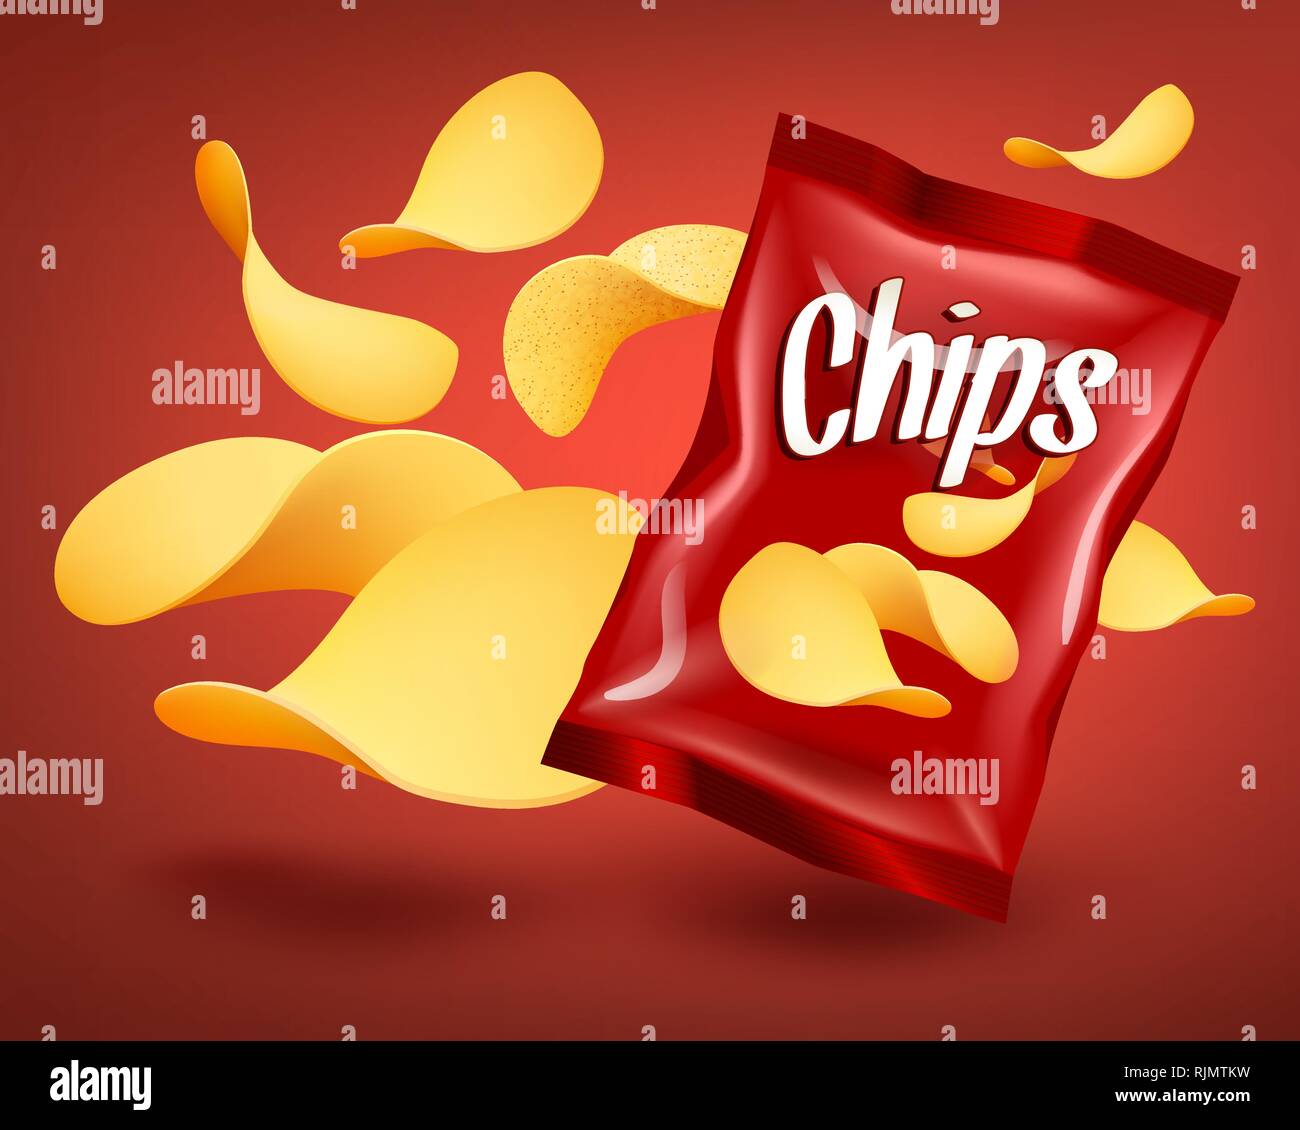 Download Red Chips Package Mockup With Yellow Crispy Snacks Advertising Concept Stock Vector Image Art Alamy Yellowimages Mockups